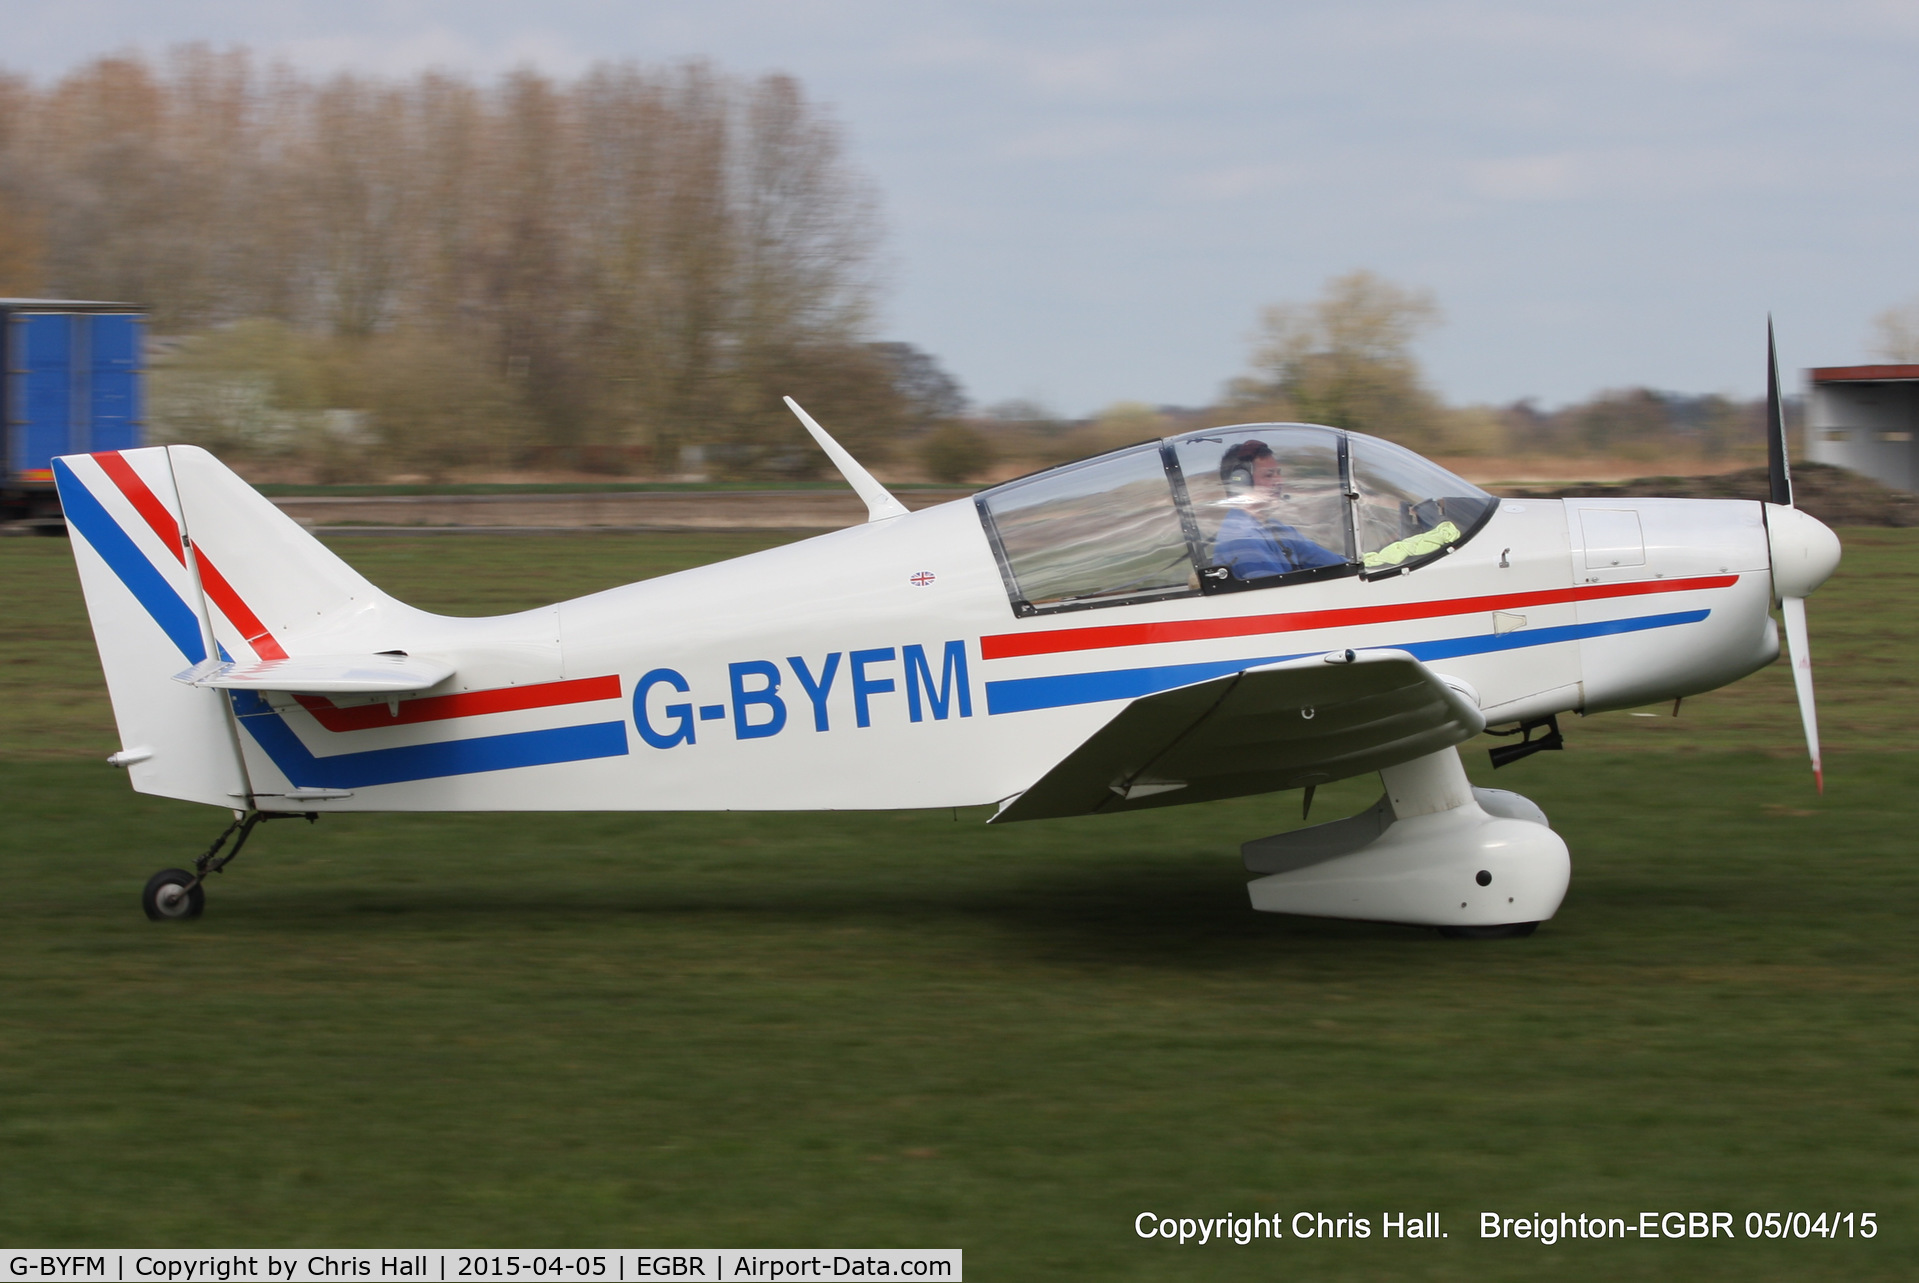 G-BYFM, 2000 Jodel DR-1050 M1 Excellence Replica C/N PFA 304-13237, at the Easter Homebuilt Aircraft Fly-in